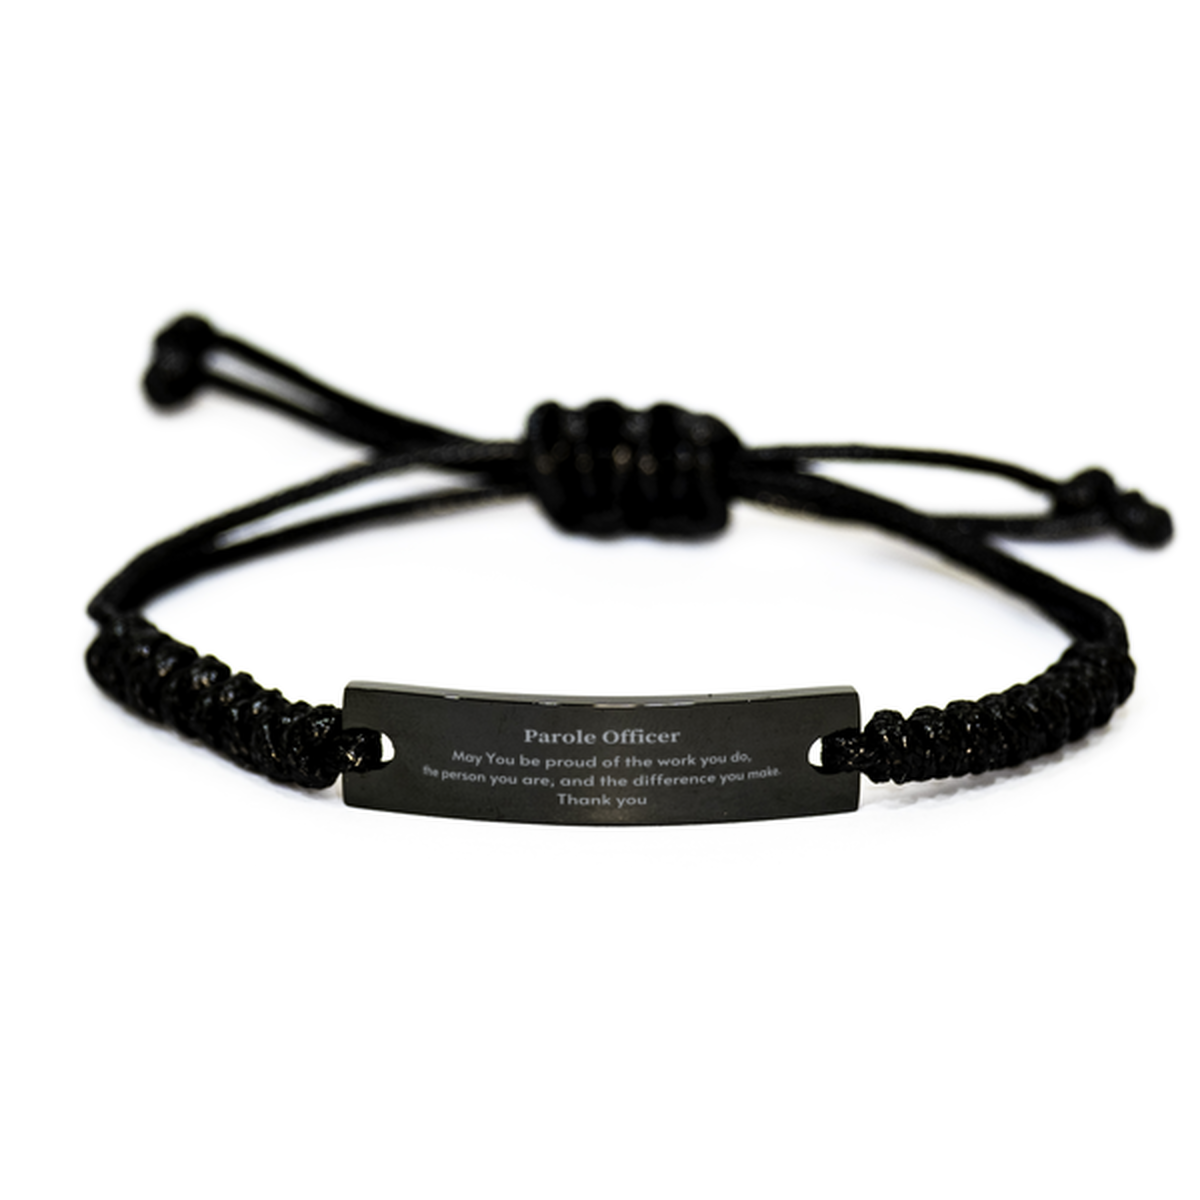 Heartwarming Black Rope Bracelet Retirement Coworkers Gifts for Parole Officer, Parole Officer May You be proud of the work you do, the person you are Gifts for Boss Men Women Friends